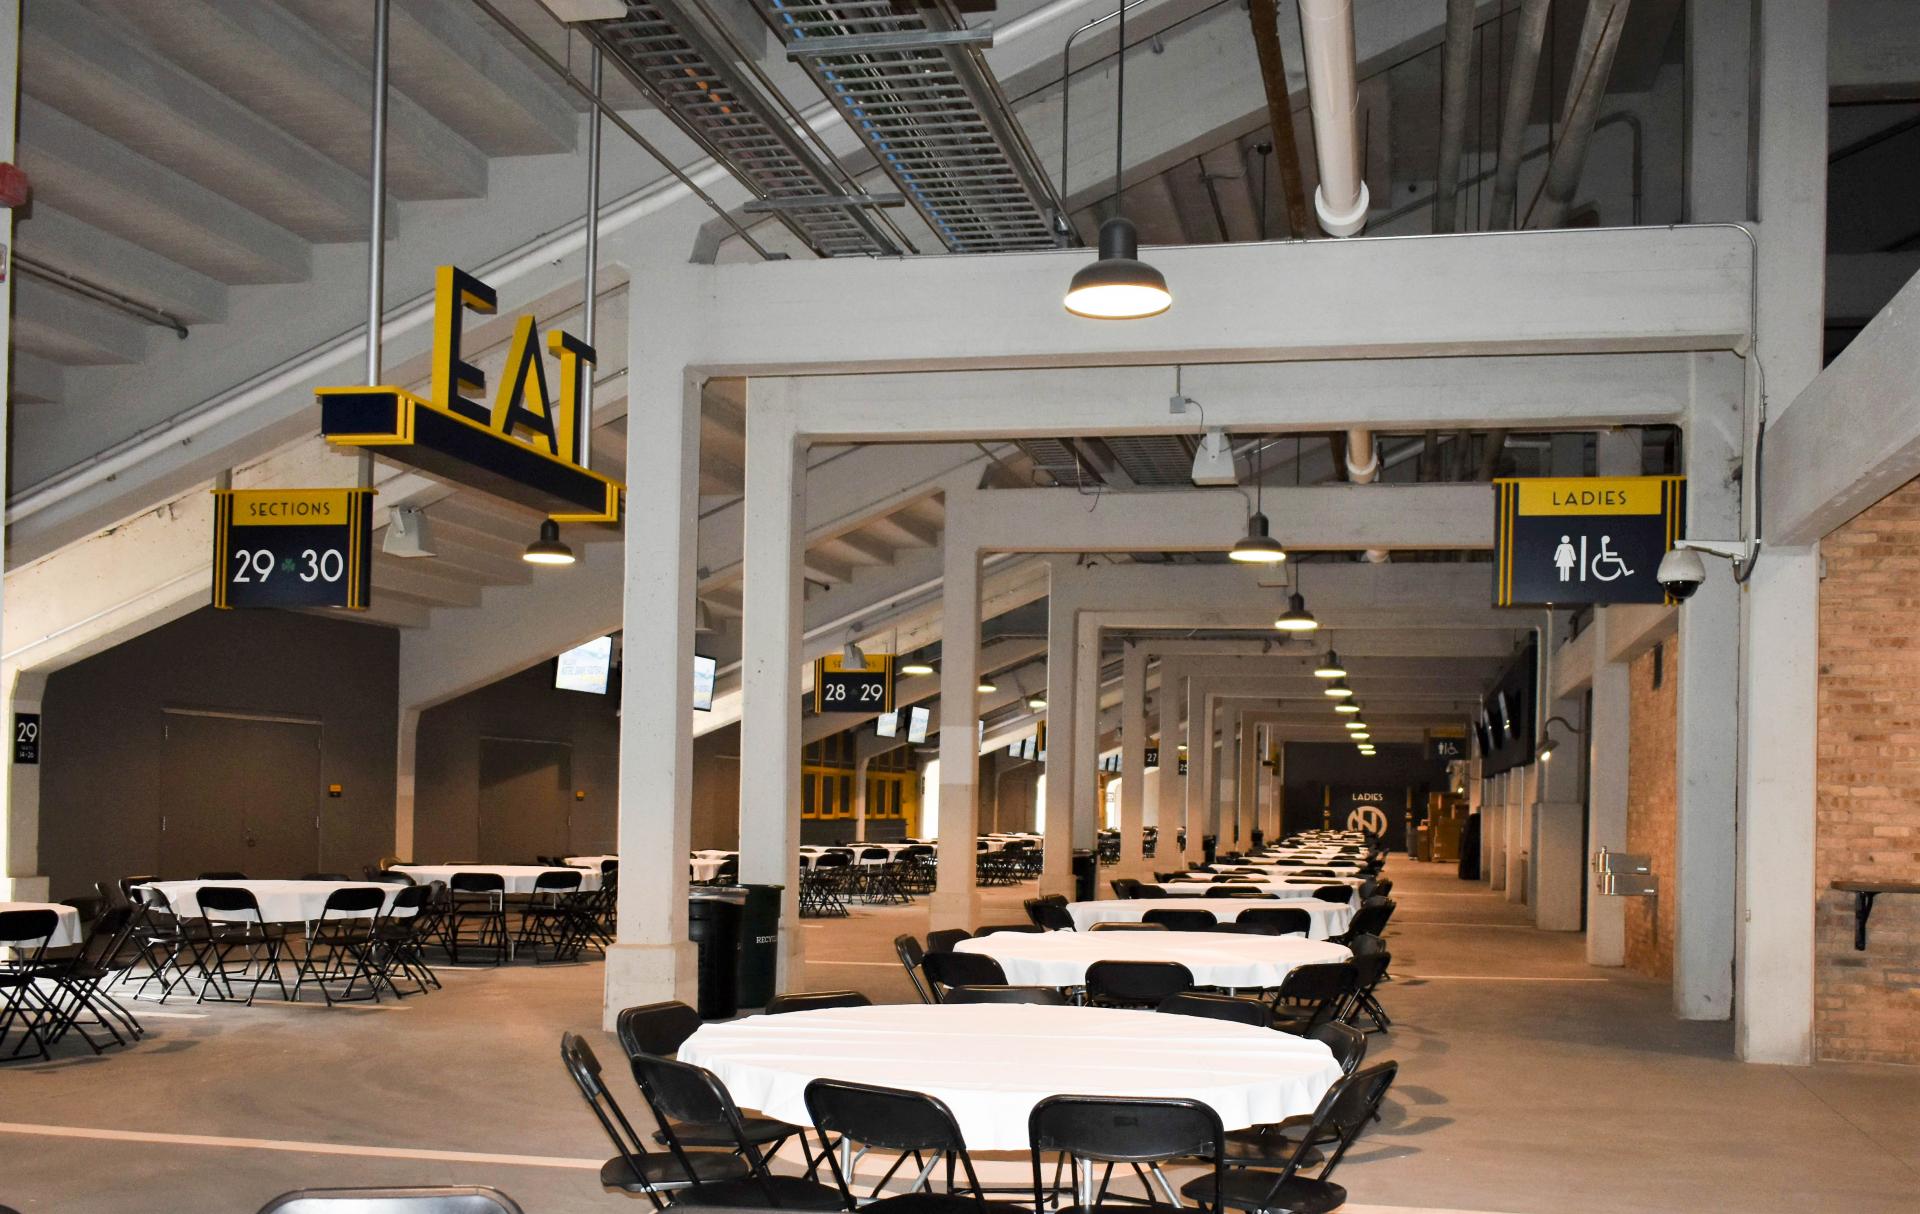 Notre Dame Stadium Concourse With Tables and Chairs Rentals